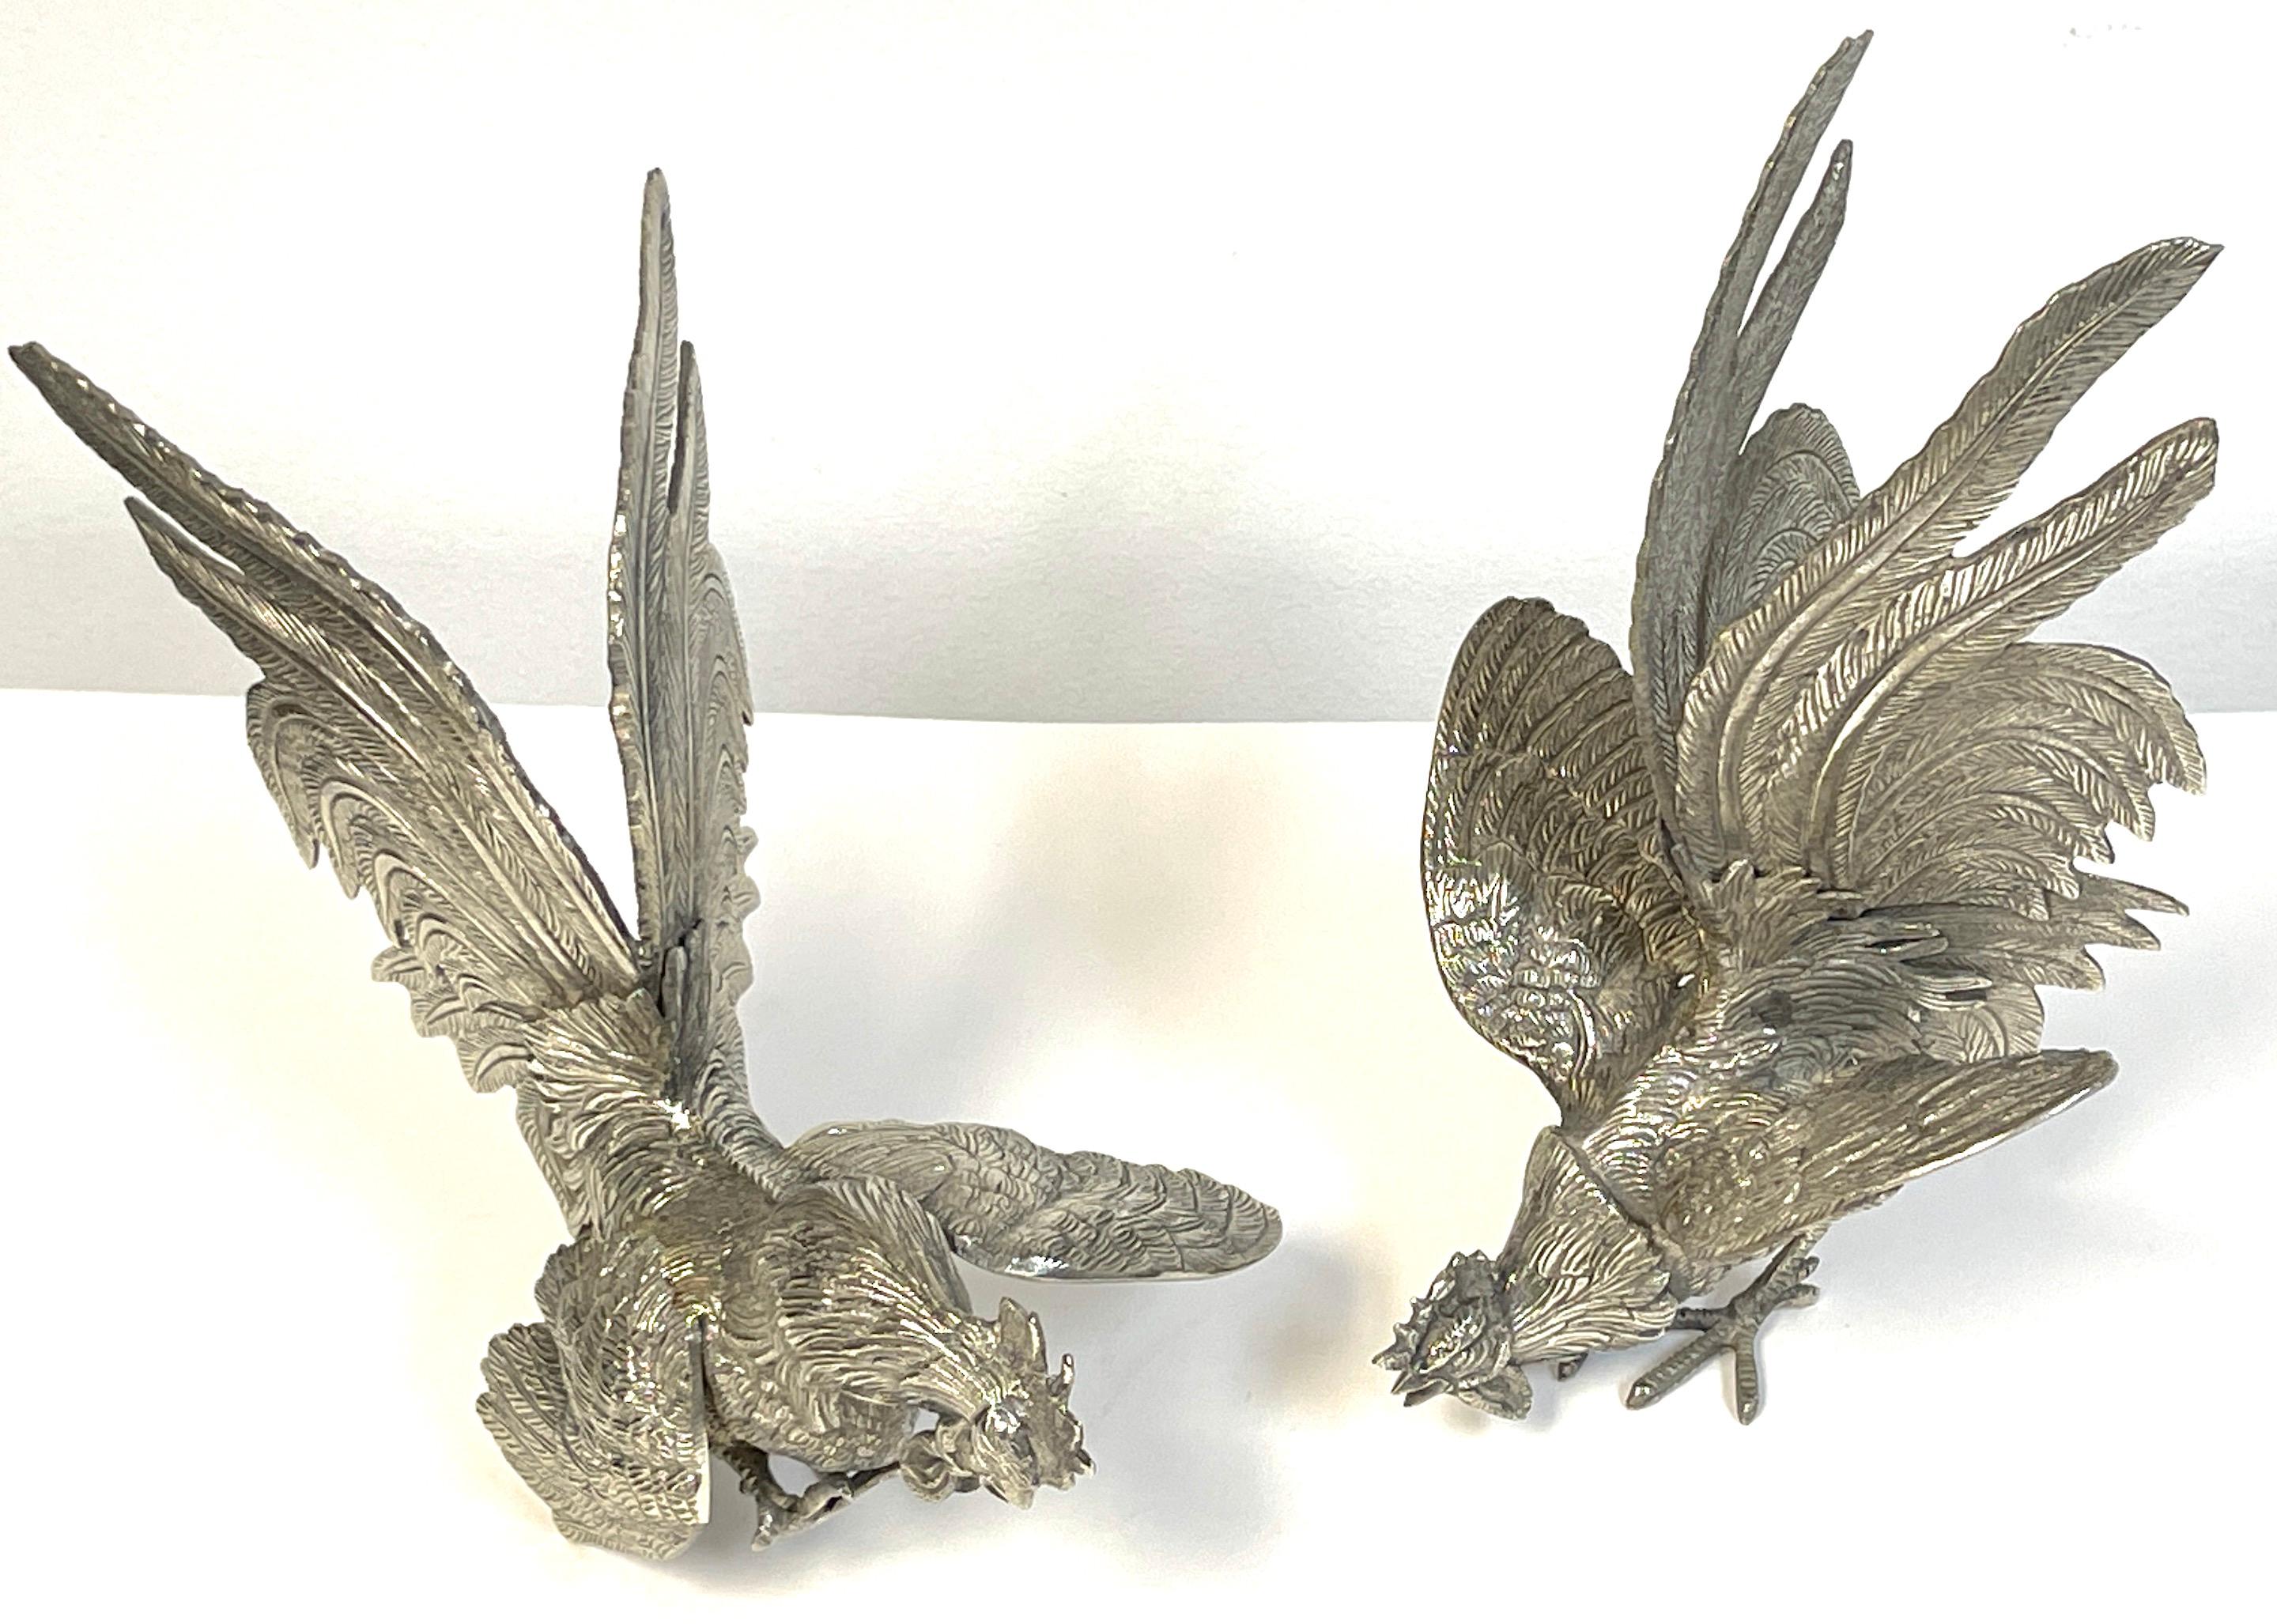 Pair of Italian Silverplated Rooster Table Ornaments 'Fighting Roosters' 
Italy, circa 1960s

Each one a silver-plated model of a rooster, realistically cast and modeled.

Overall Measurements 
Rooster #1 -10-Inches high h x 7 -Inches wide x 7